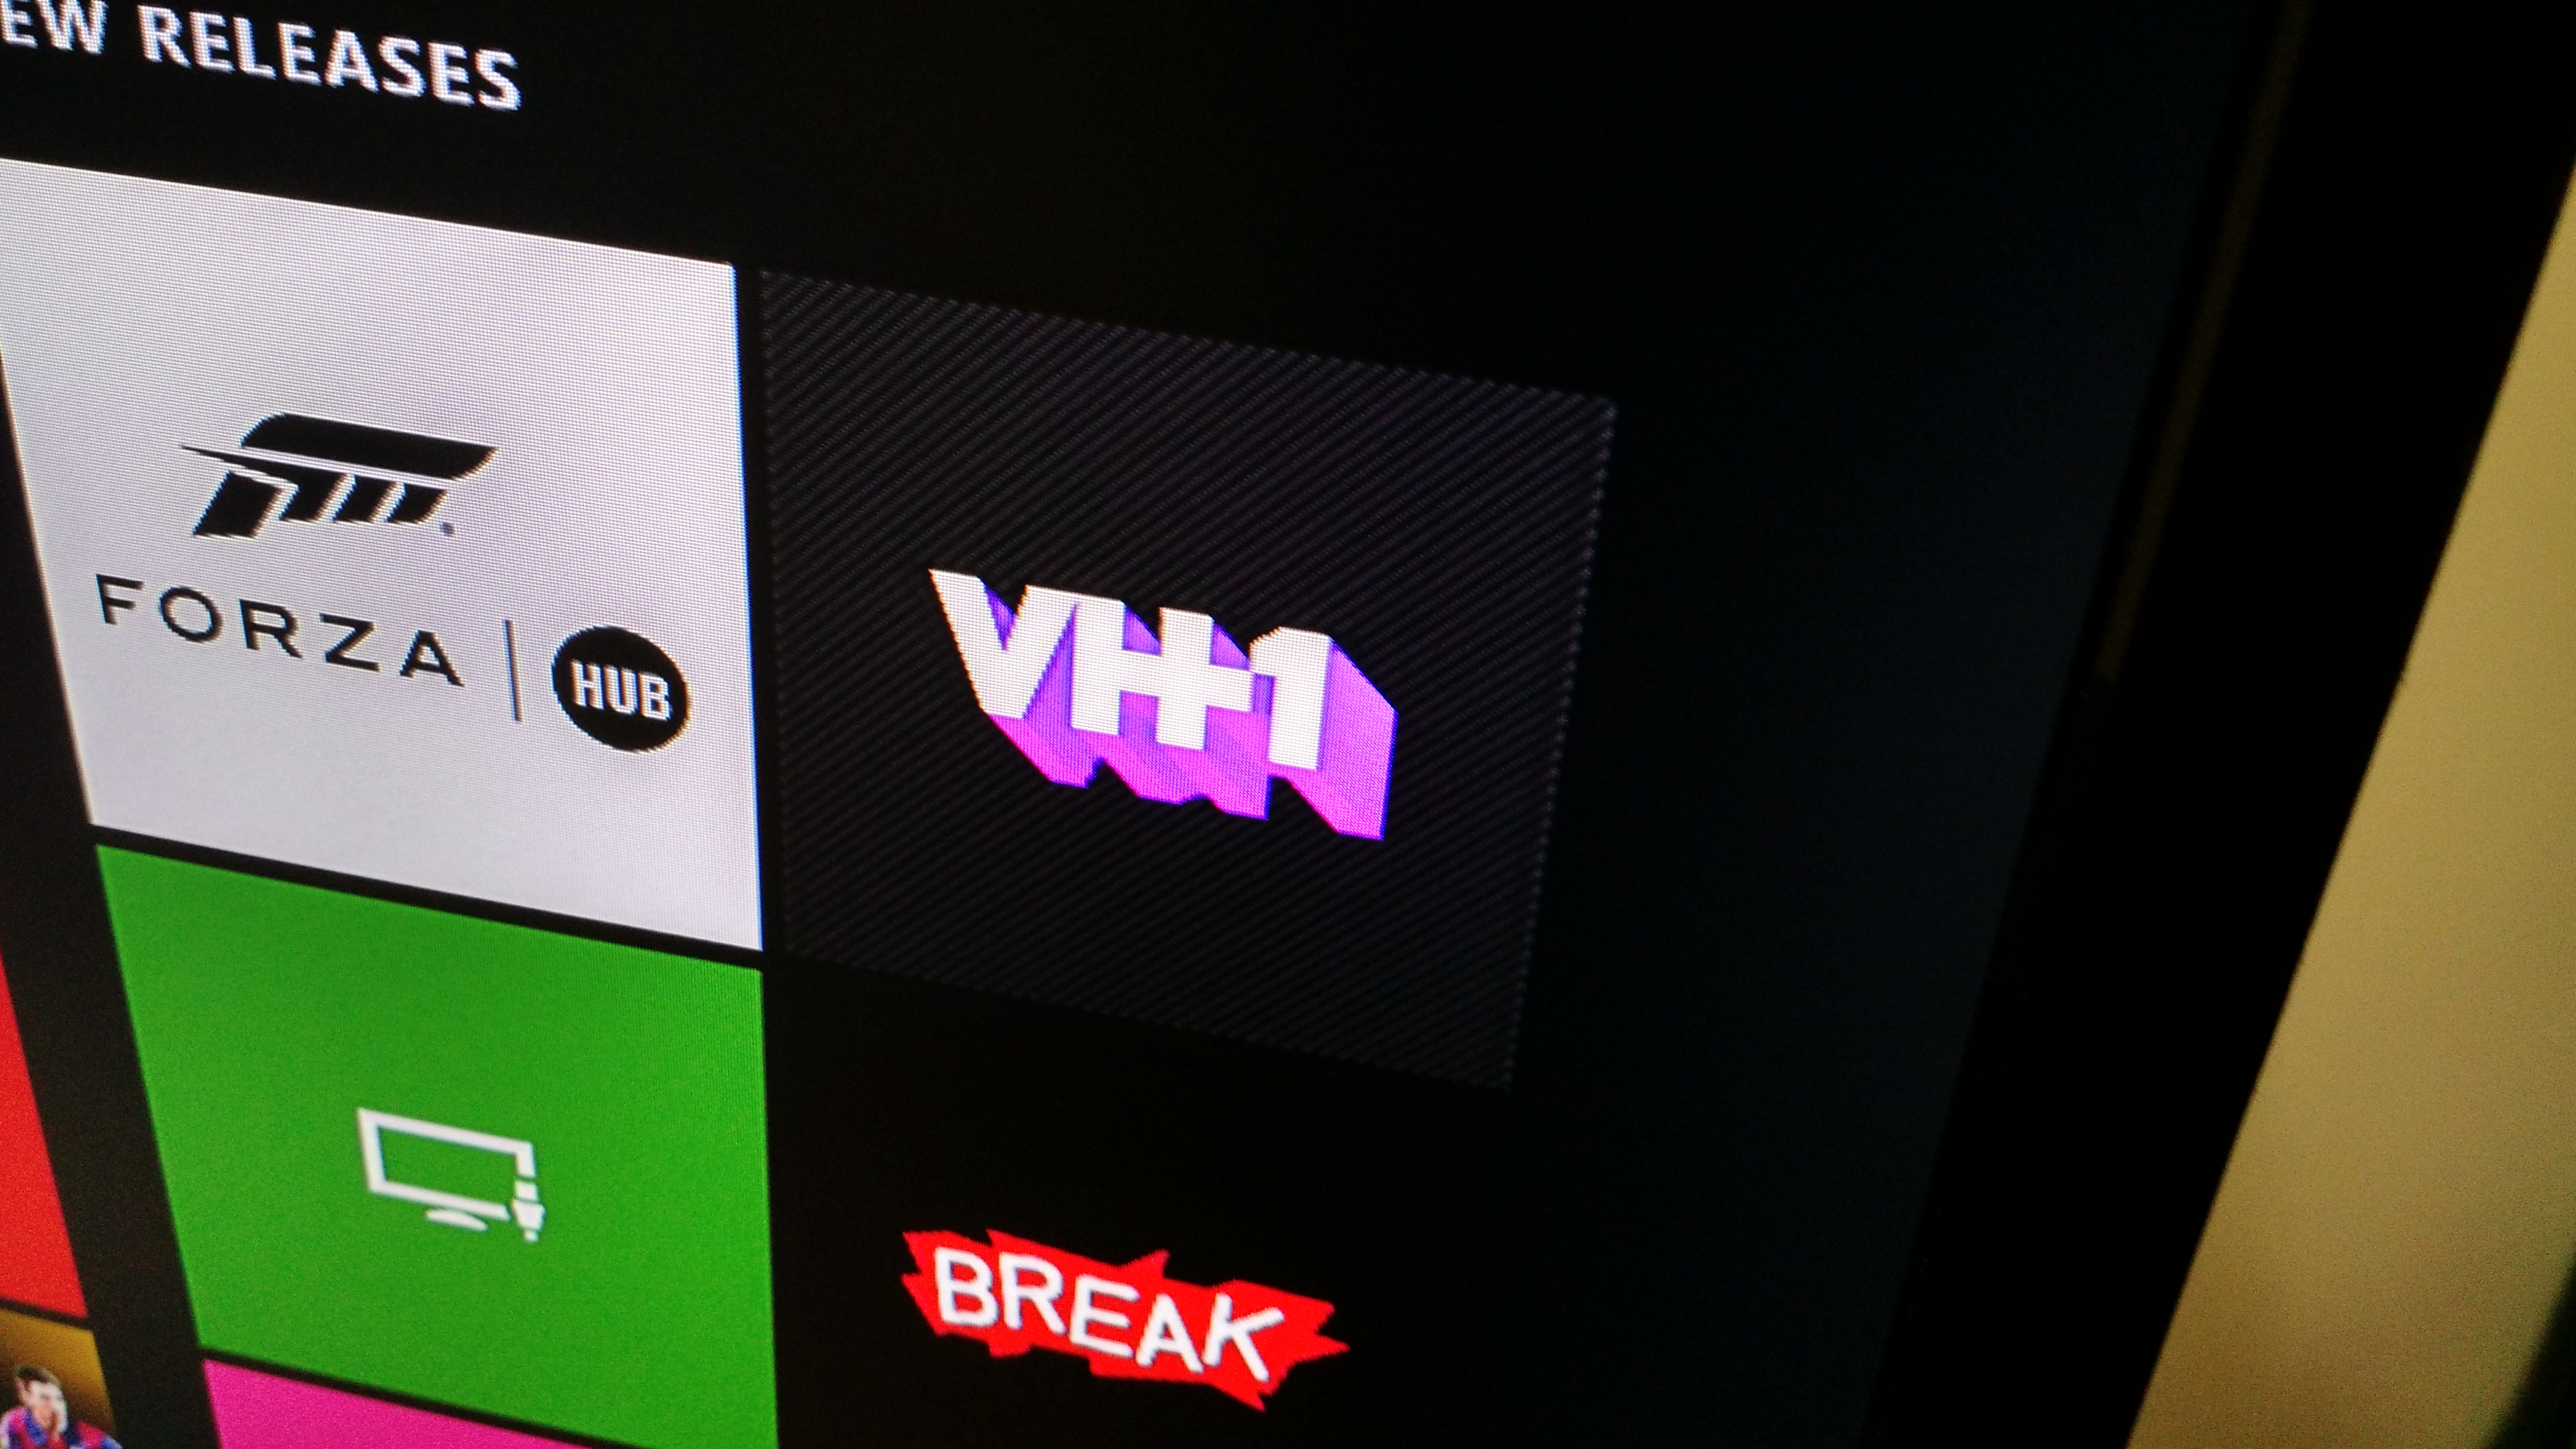 VH1 for Xbox One